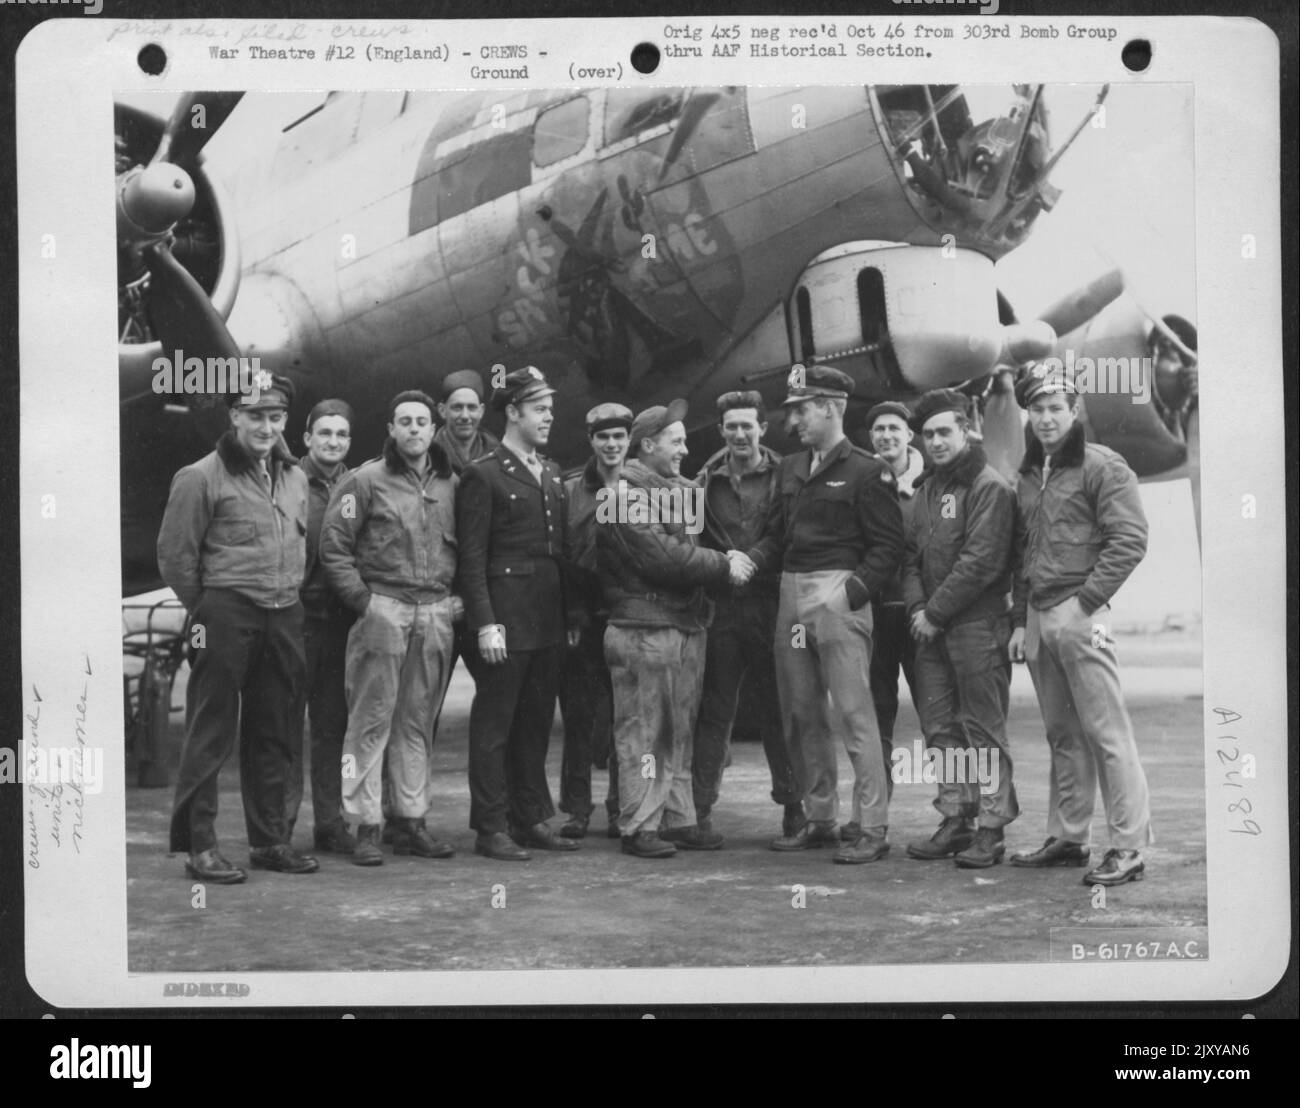 https://c8.alamy.com/comp/2JXYAN6/ground-and-air-crew-of-the-360th-bomb-squadron-303rd-bomb-group-beside-the-boeing-b-17-flying-fortress-sack-time-england-3-april-1945-2JXYAN6.jpg